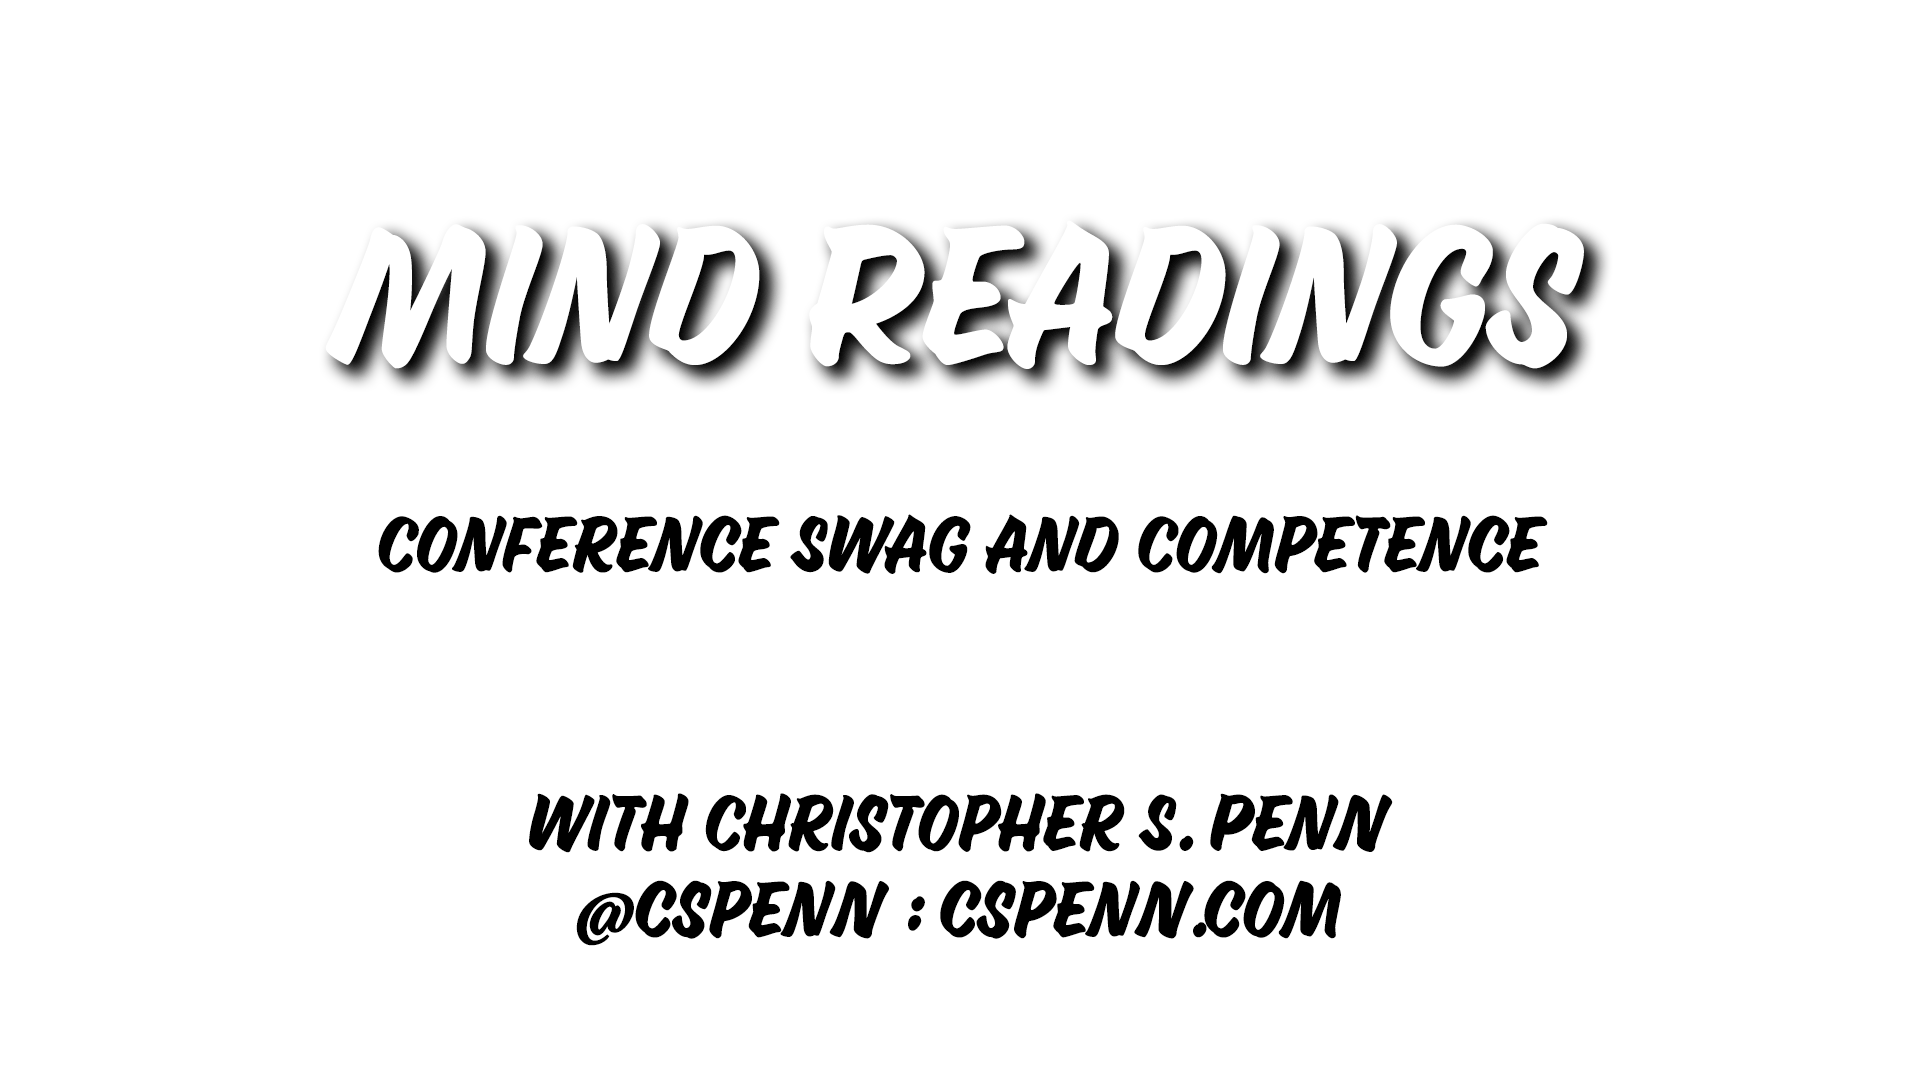 Mind Readings: Conference Swag and Competence